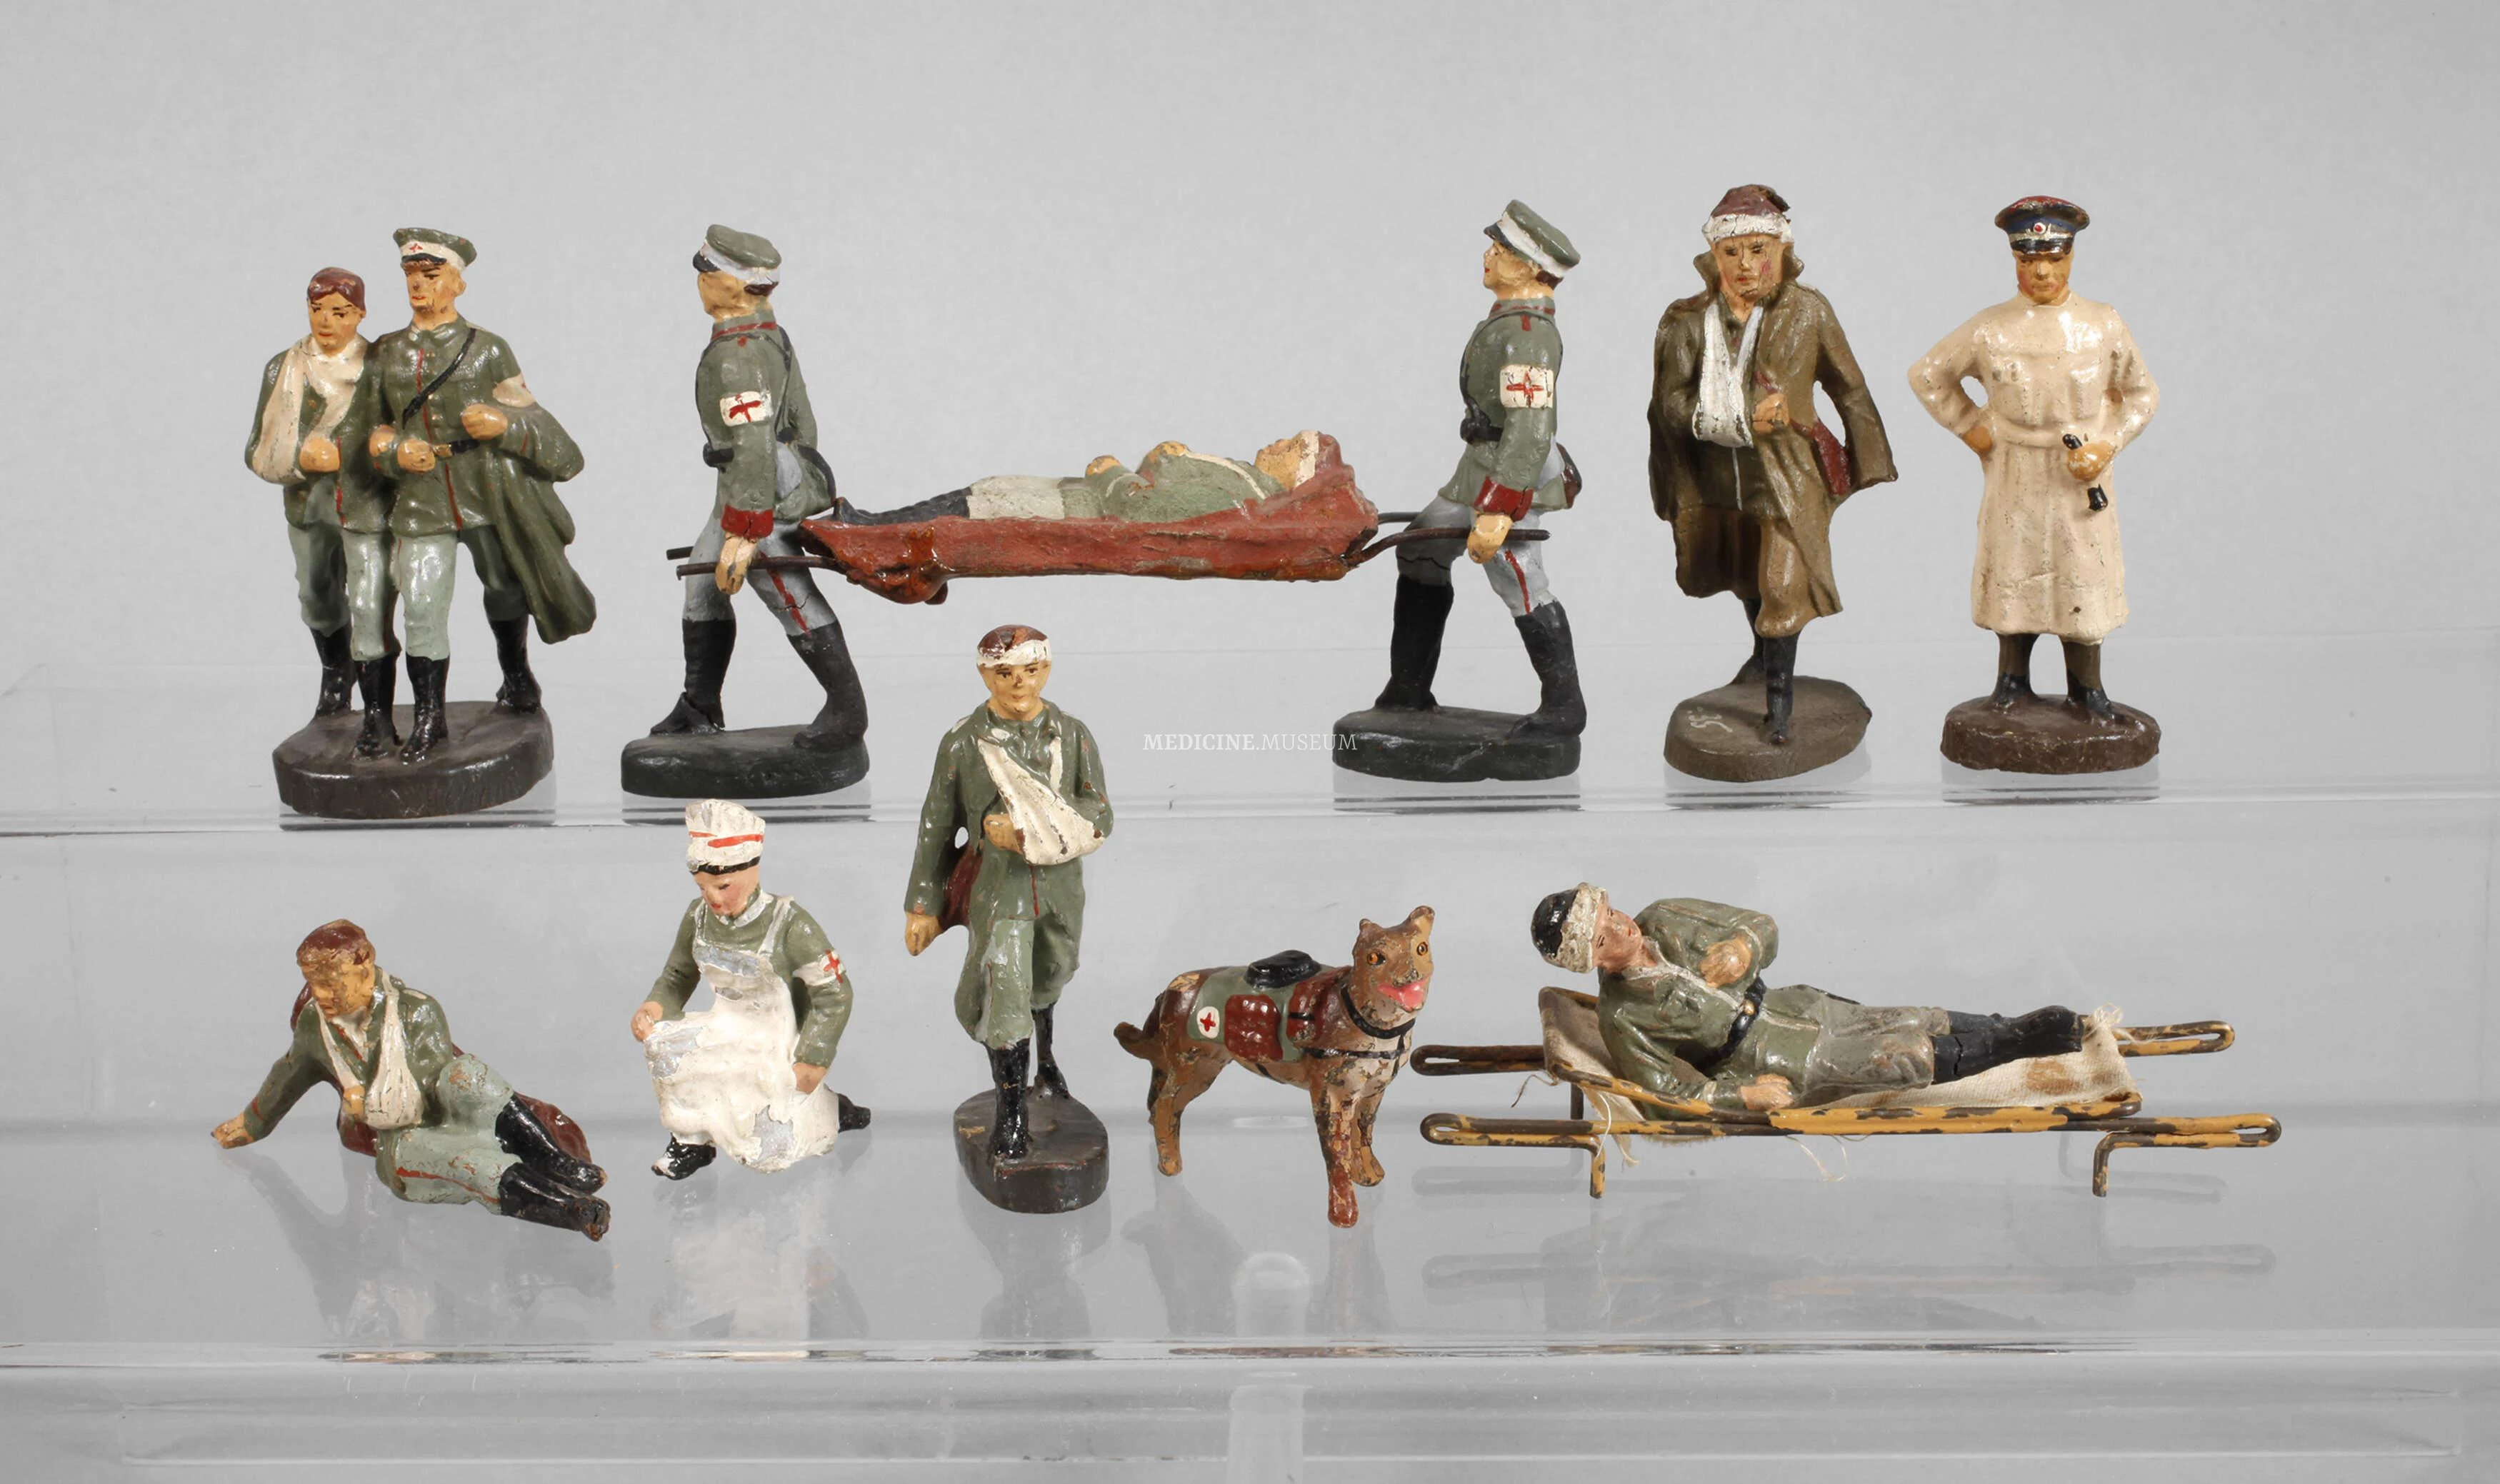 Elastolin toy figures - soldiers, nurses, paramedics and military surgeons. O. und M. Hausser, West Germany